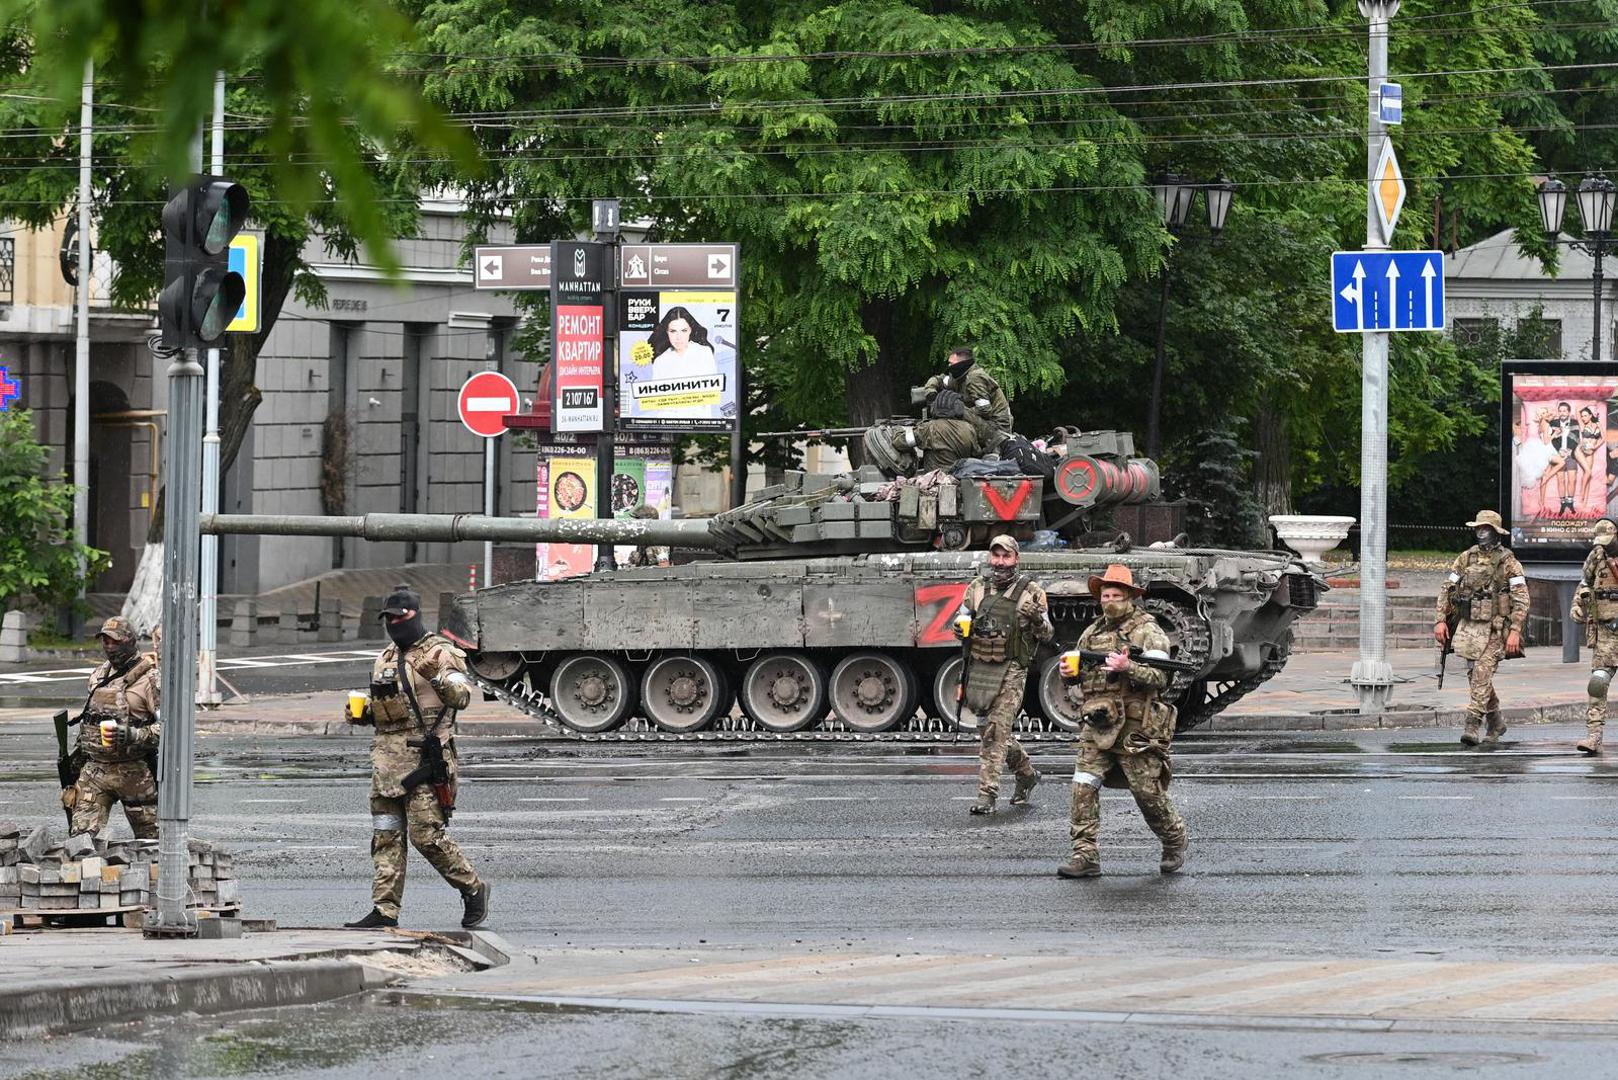 Fighters of Wagner private mercenary group cross a street as they get deployed near the headquarters of the Southern Military District in the city of Rostov-on-Don, Russia, June 24, 2023. REUTERS/Stringer Photo: Stringer/REUTERS